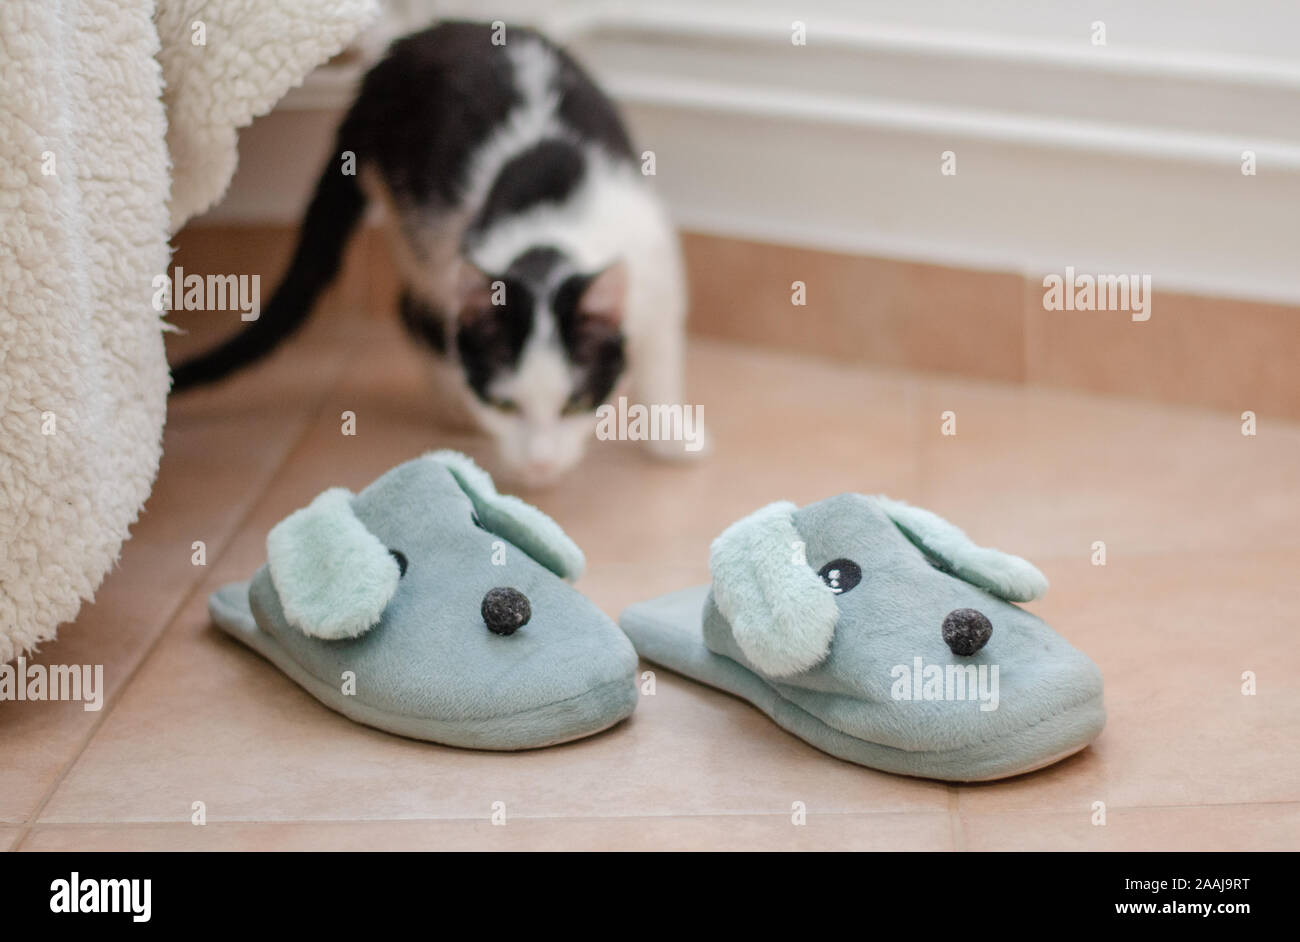 Cat attacking doggy slippers Stock Photo